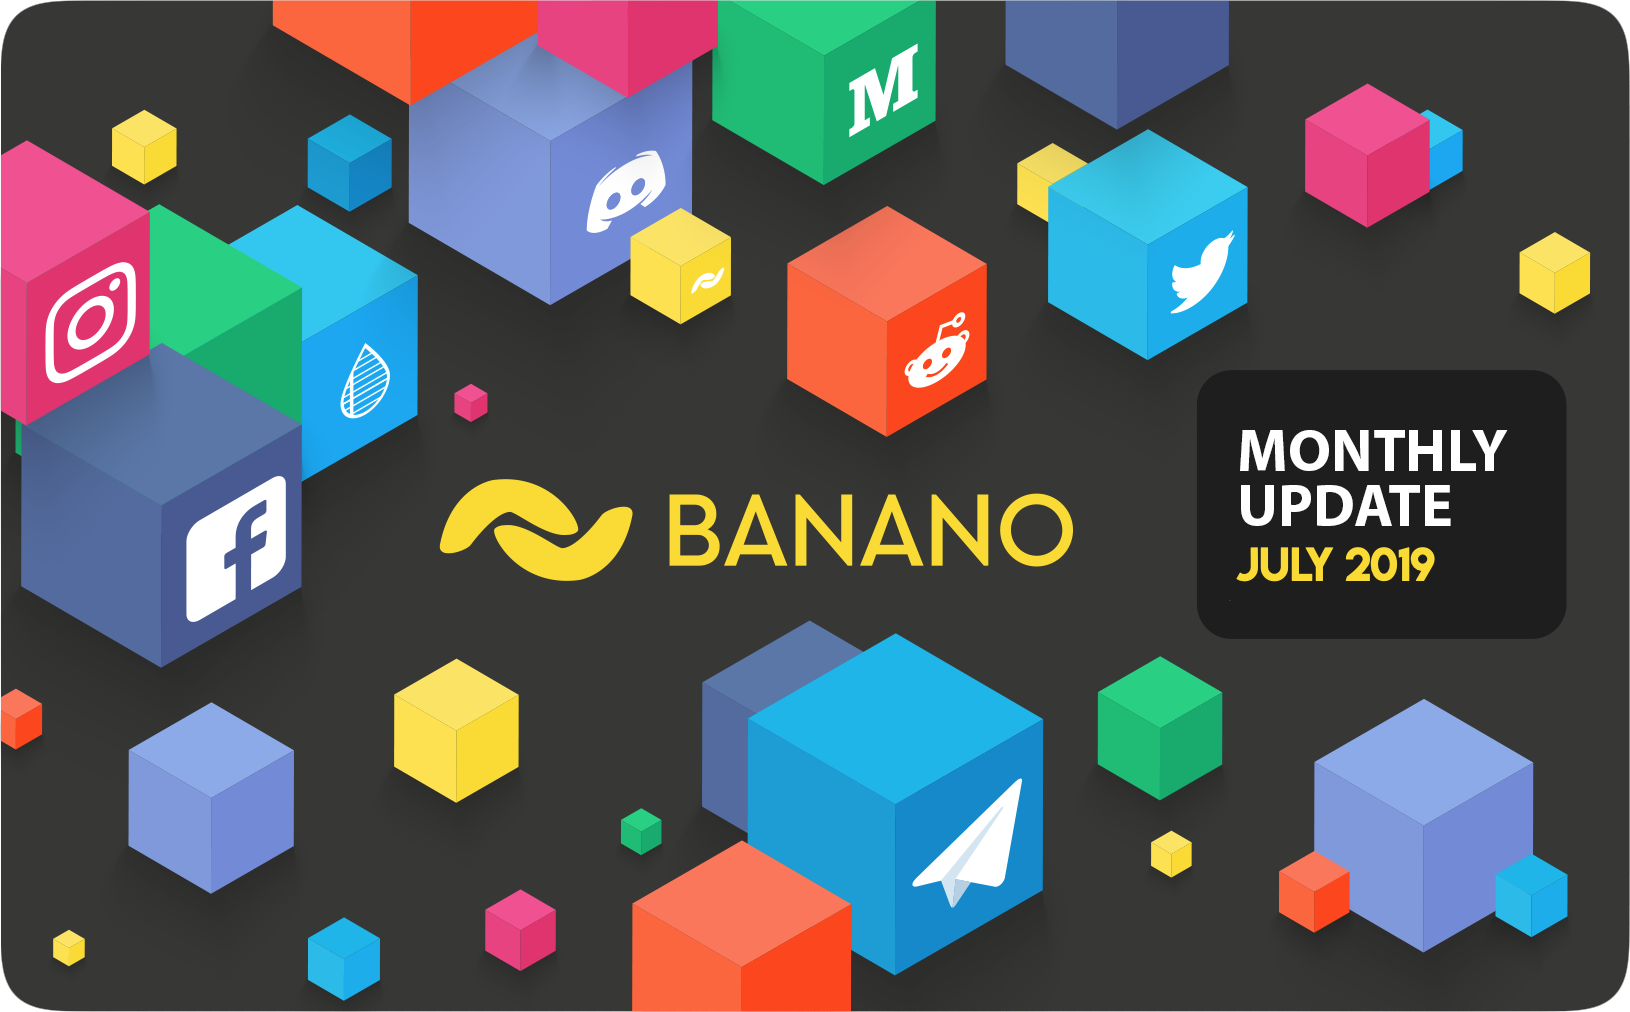 BANANO Monthly Update July 2019